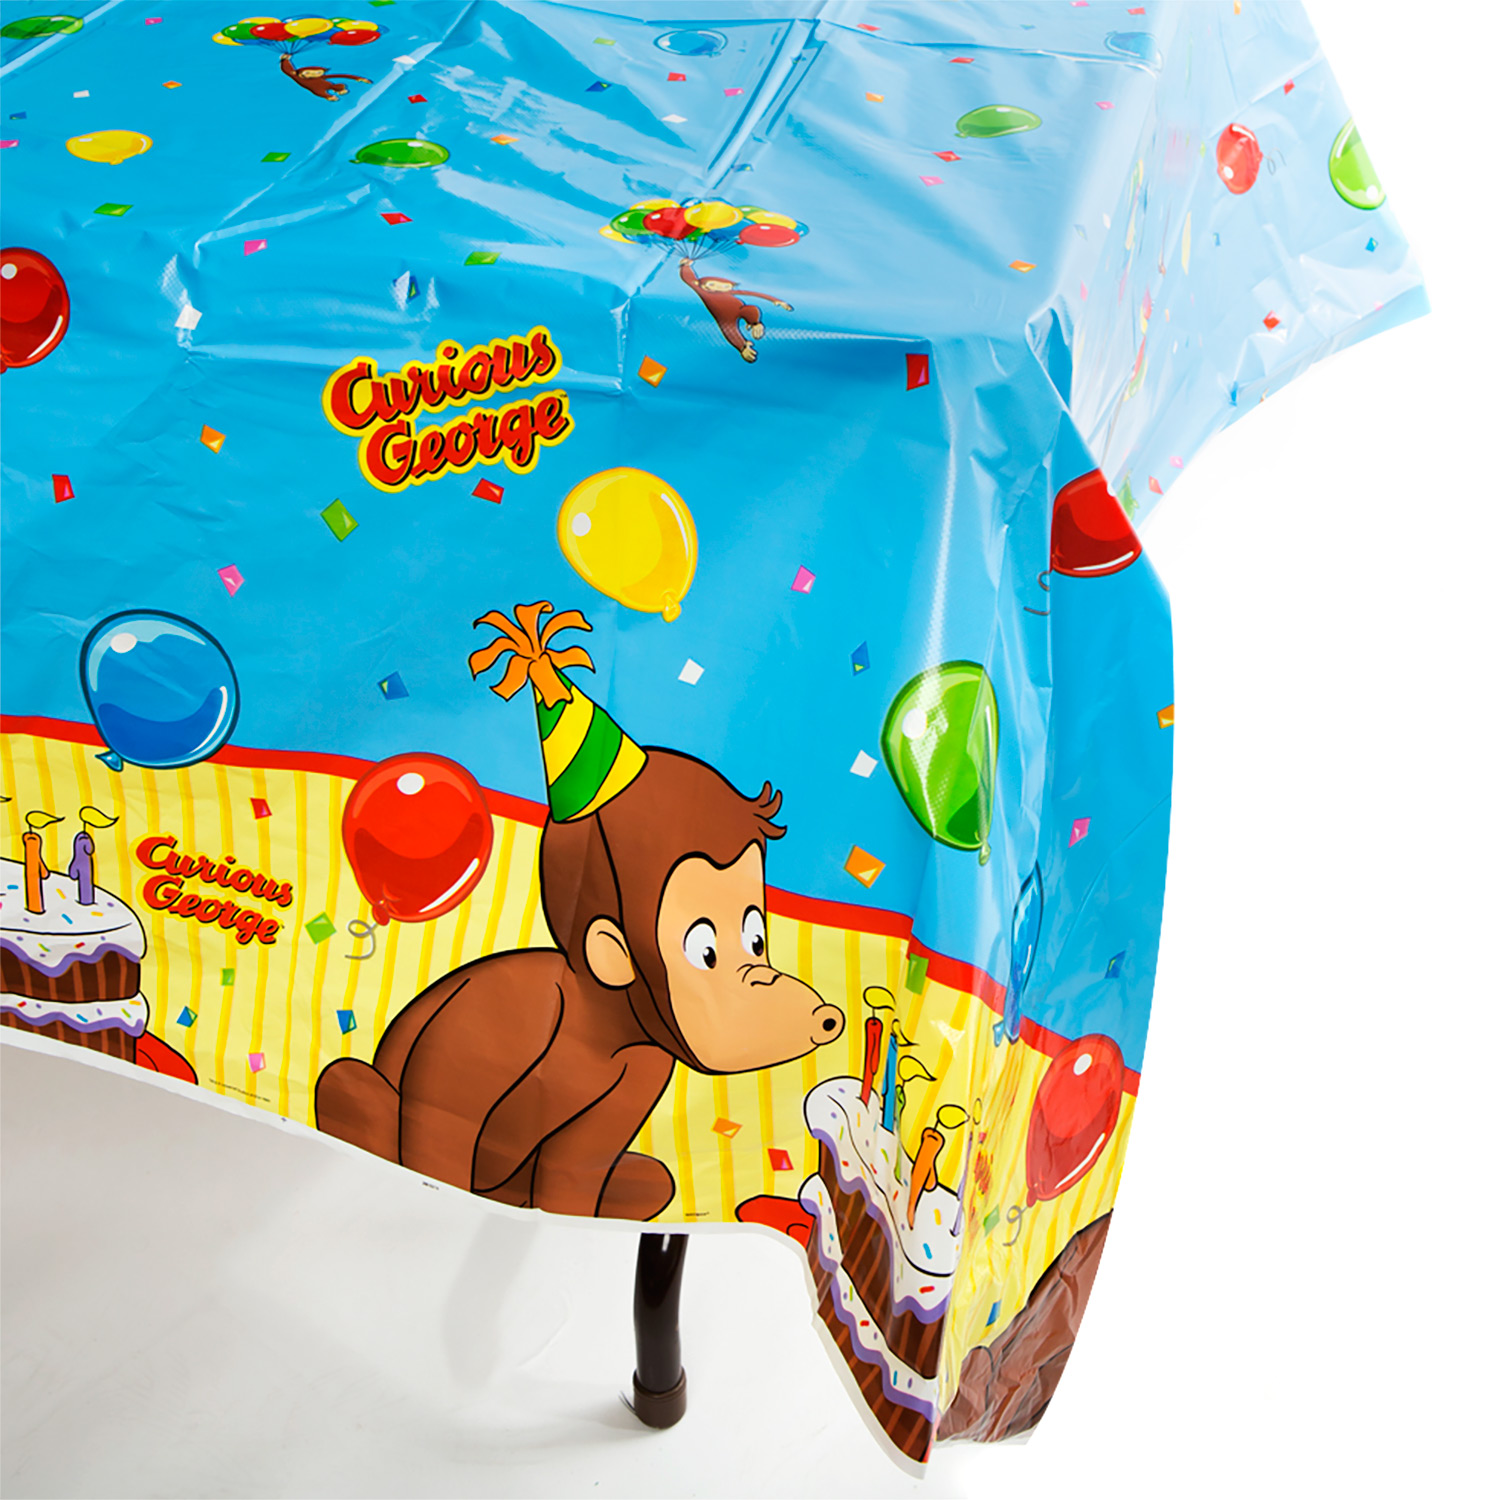 What stores sell Curious George merchandise?